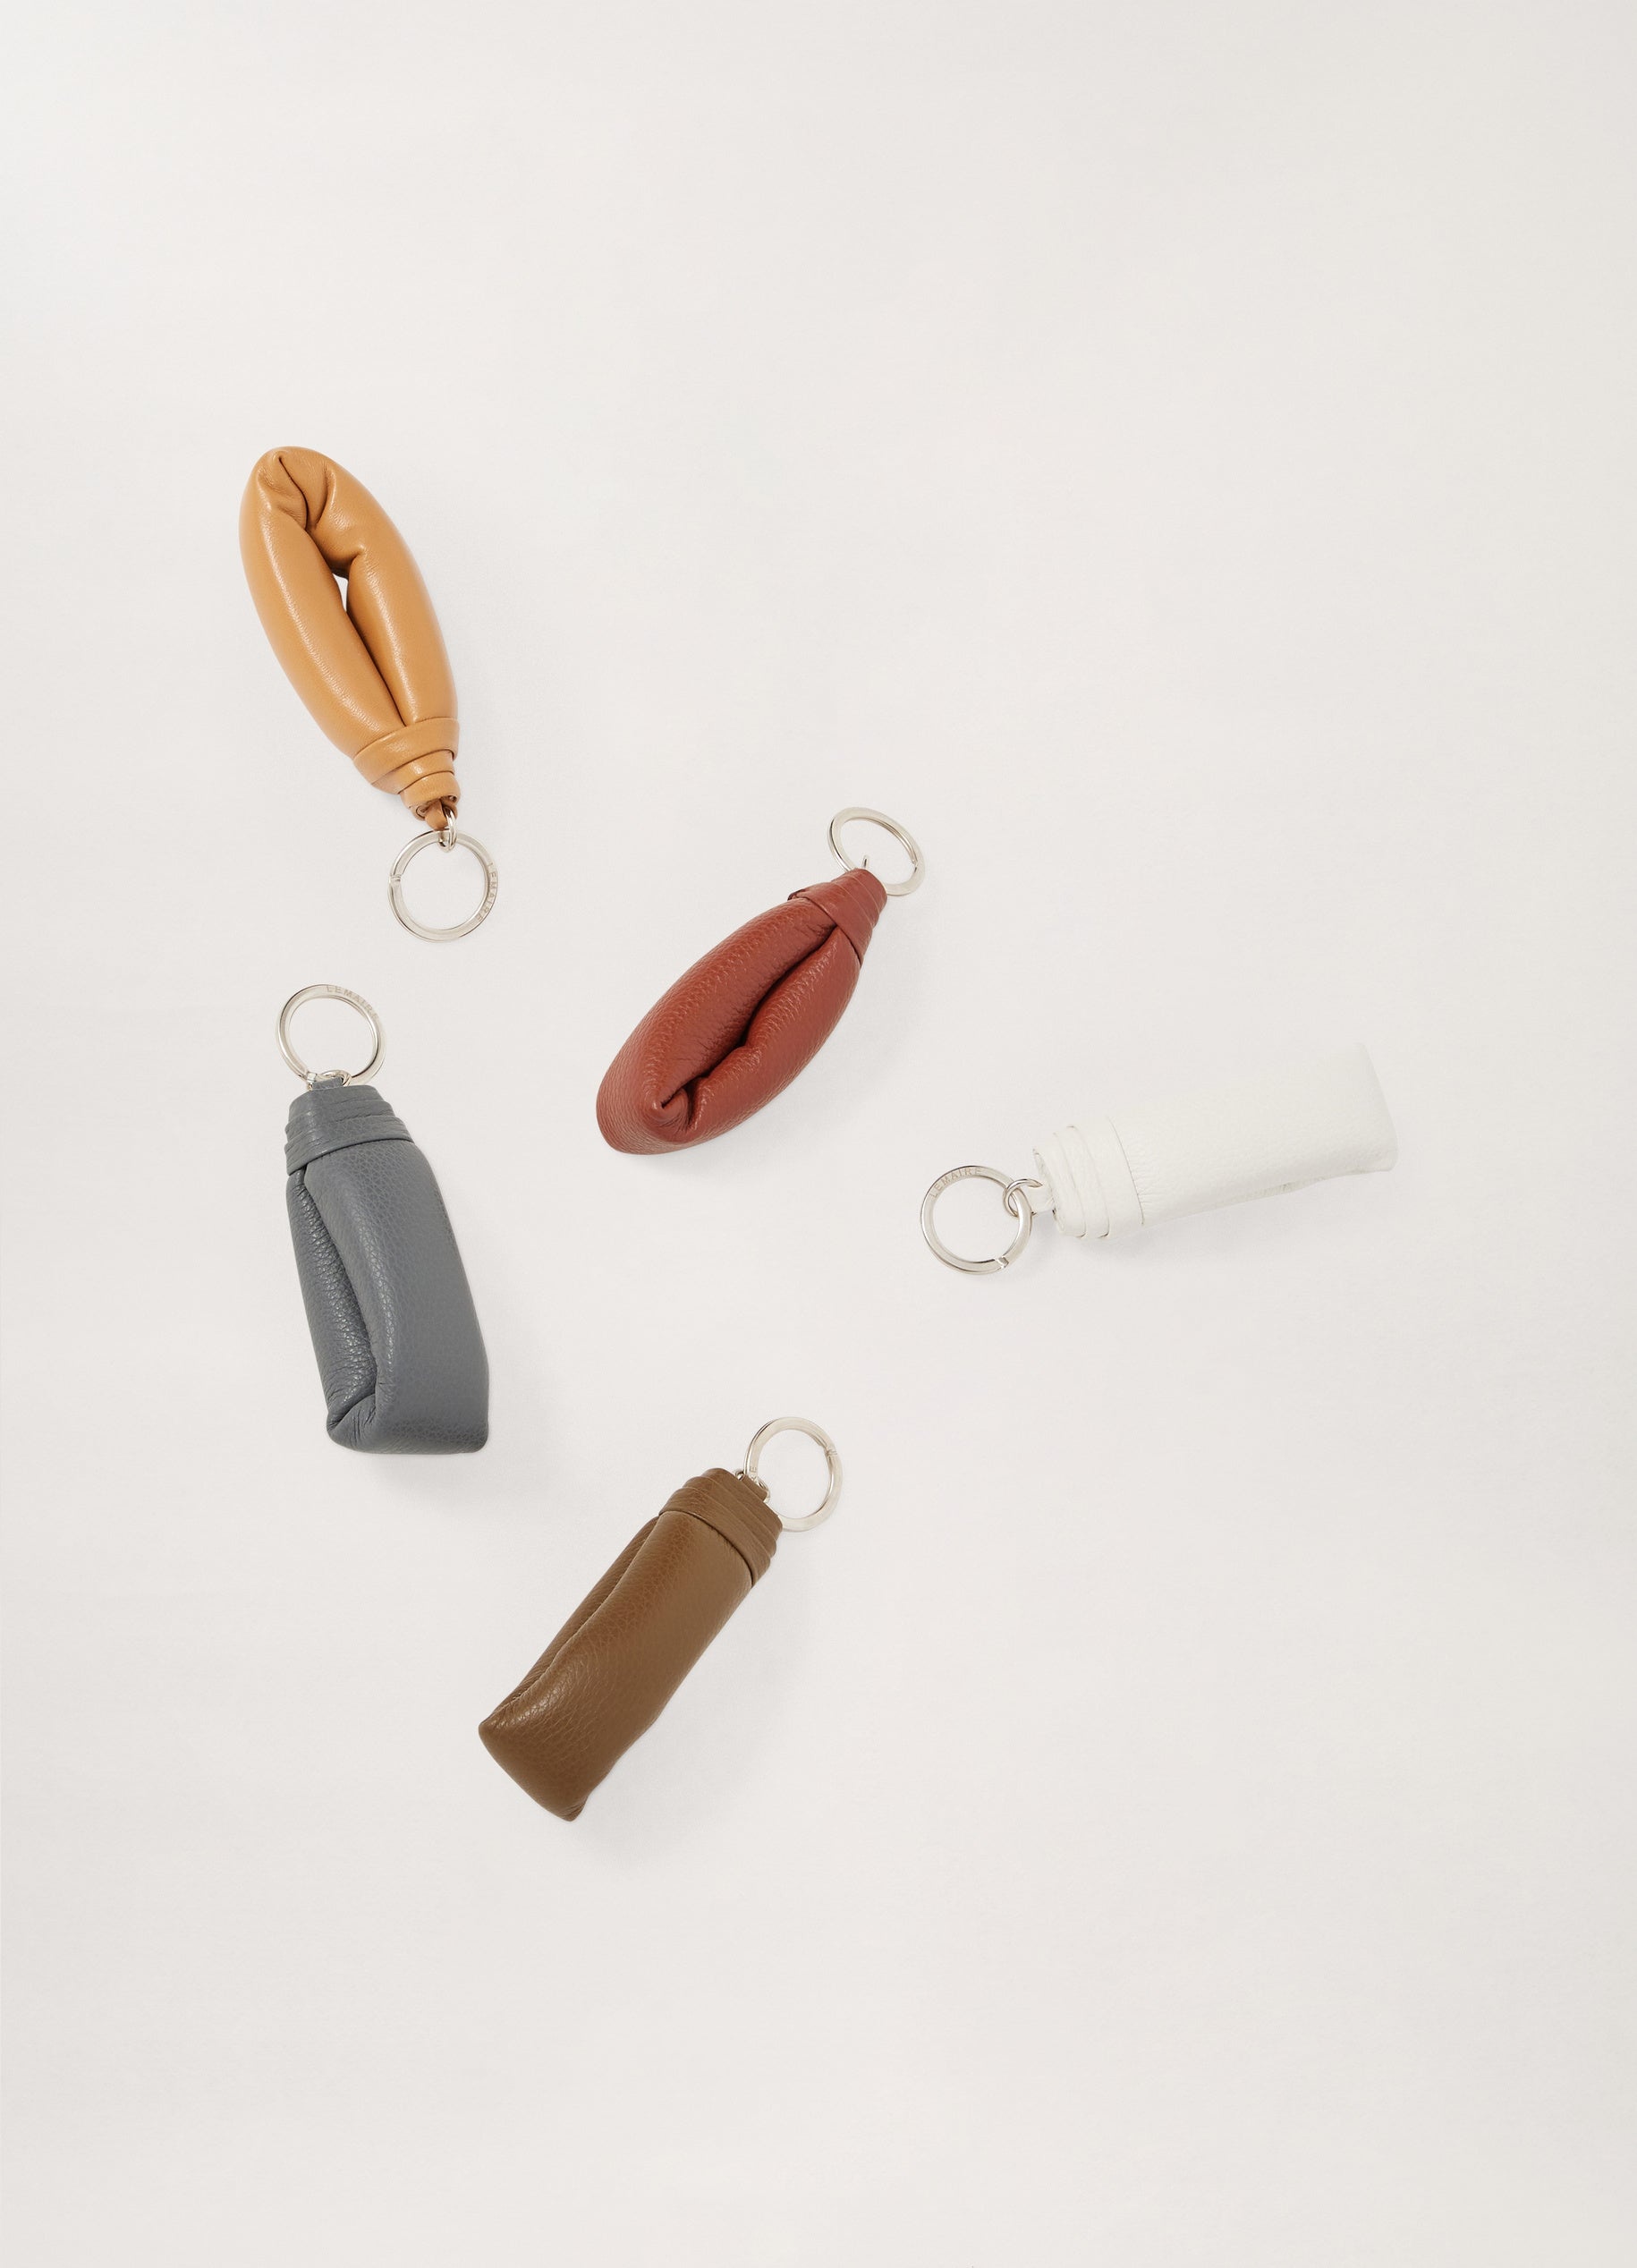 WADDED KEY HOLDER
SOFT GRAINED LEATHER - 2